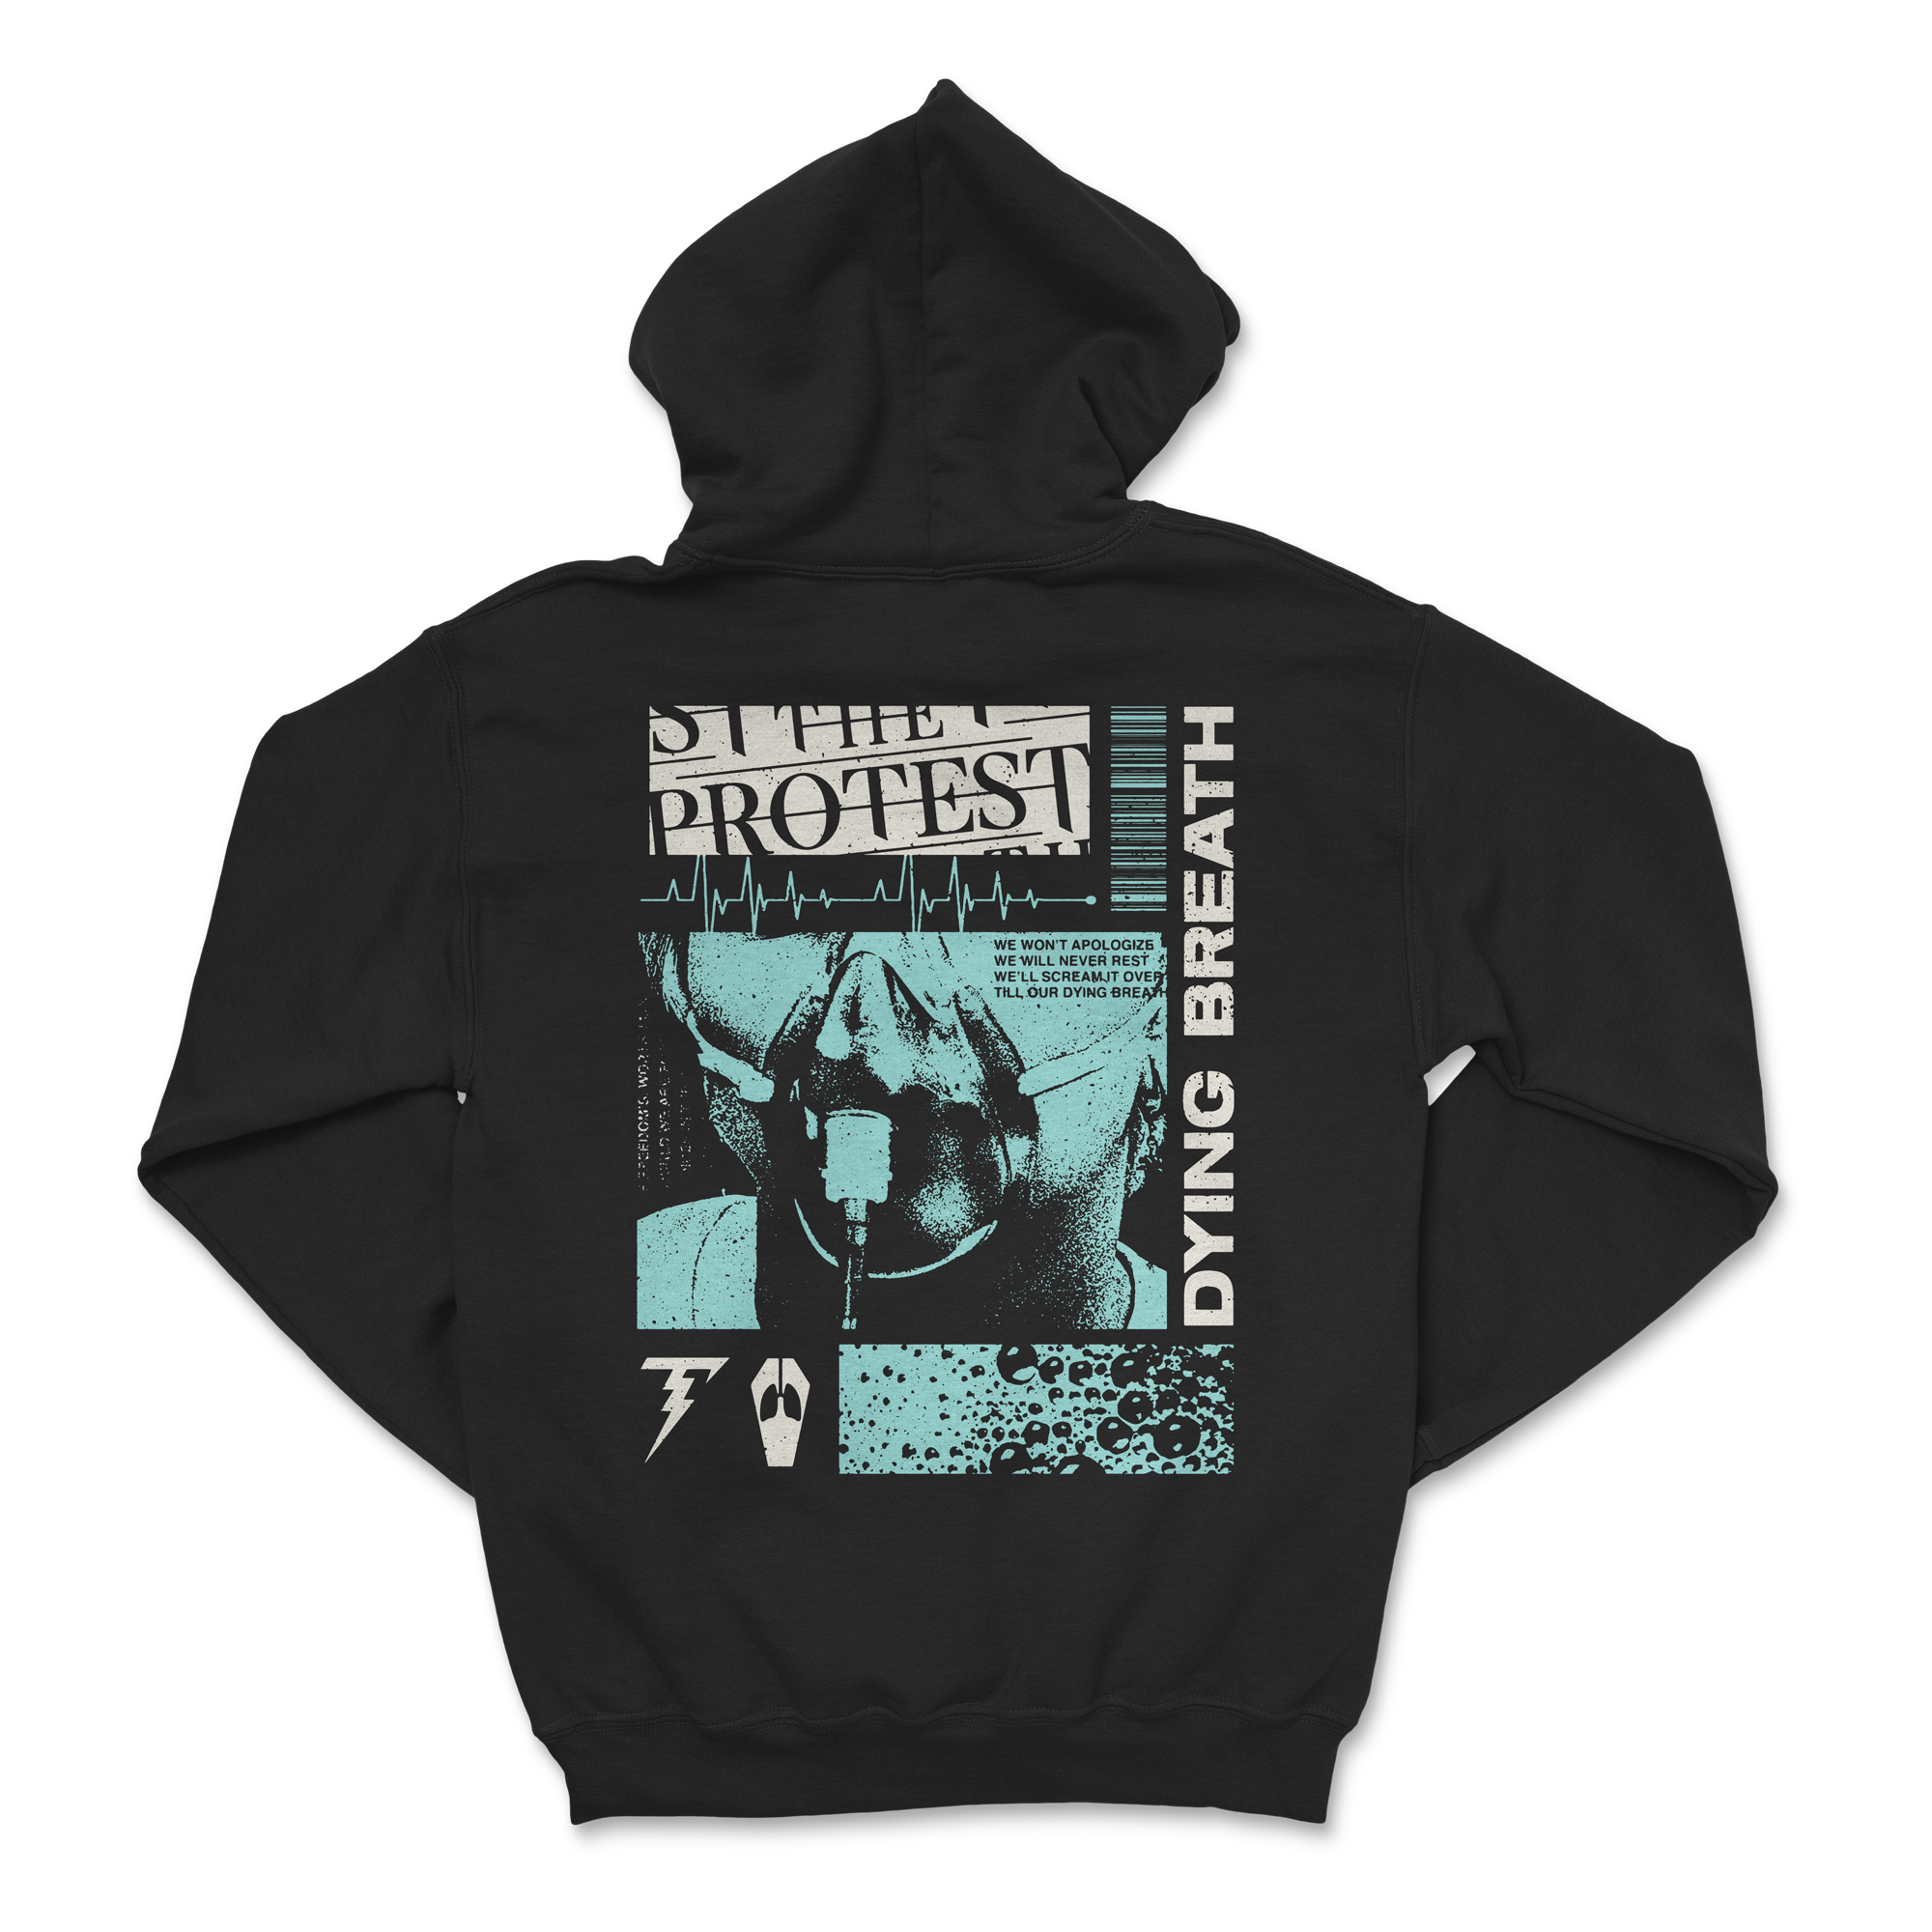 The Protest - Dying Breath Hoodie